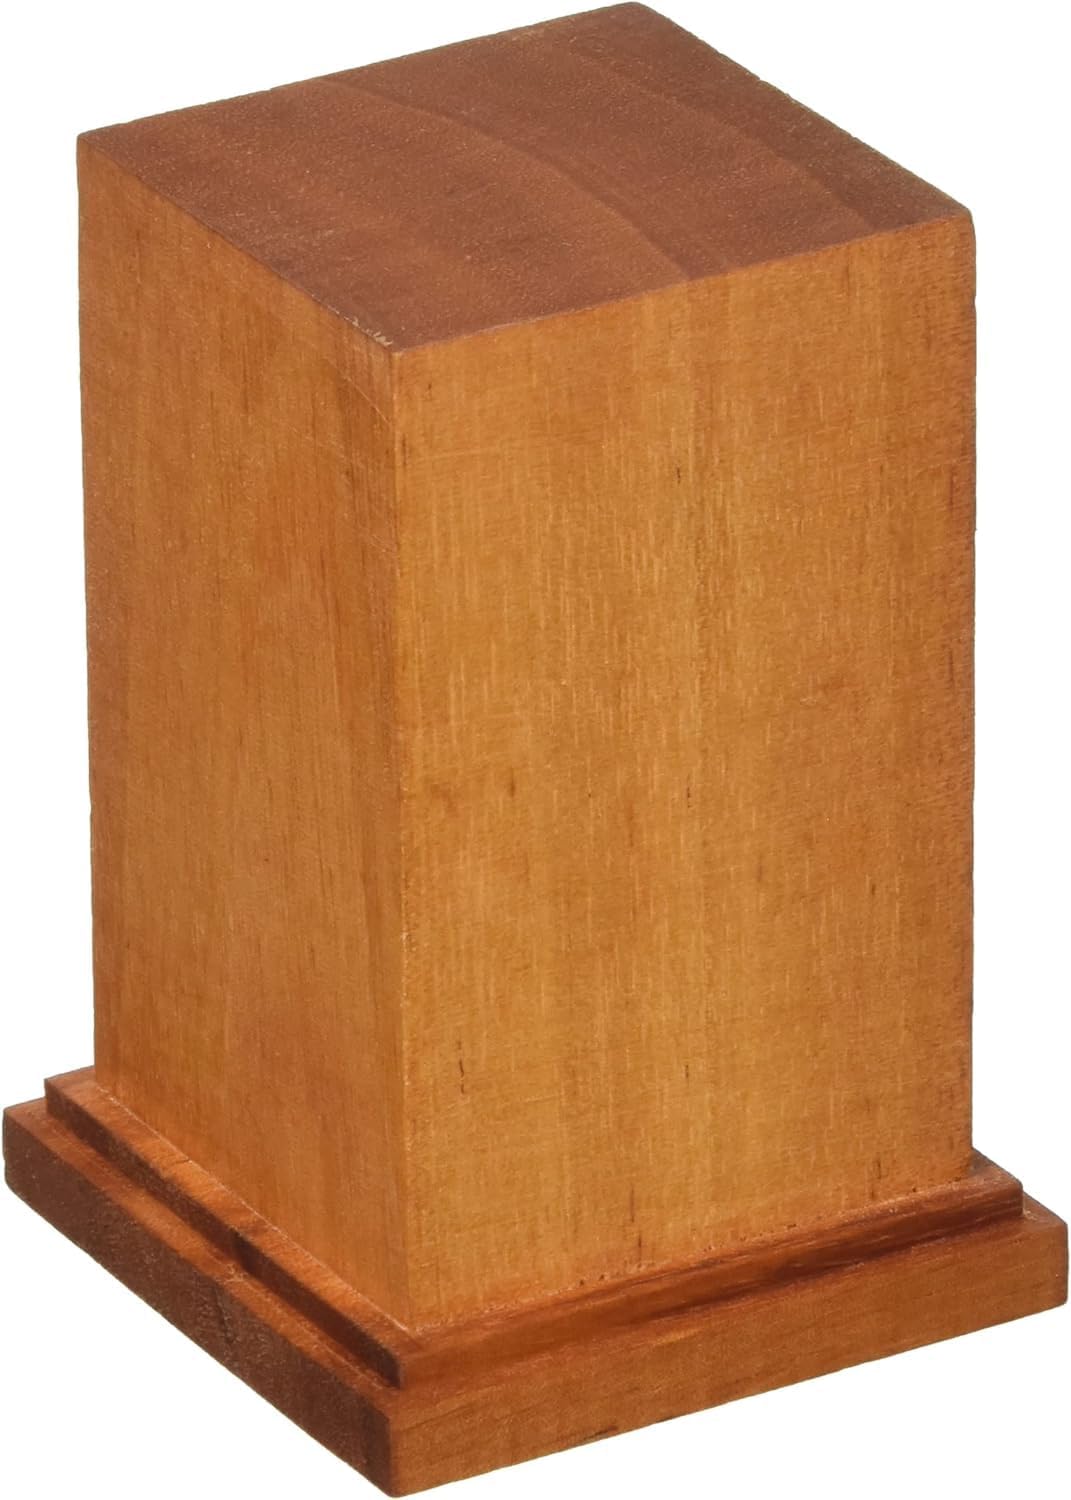 GSI Creos DB004 Wooden Base Square L 60mm Square Height 90mm Hobby Display Base